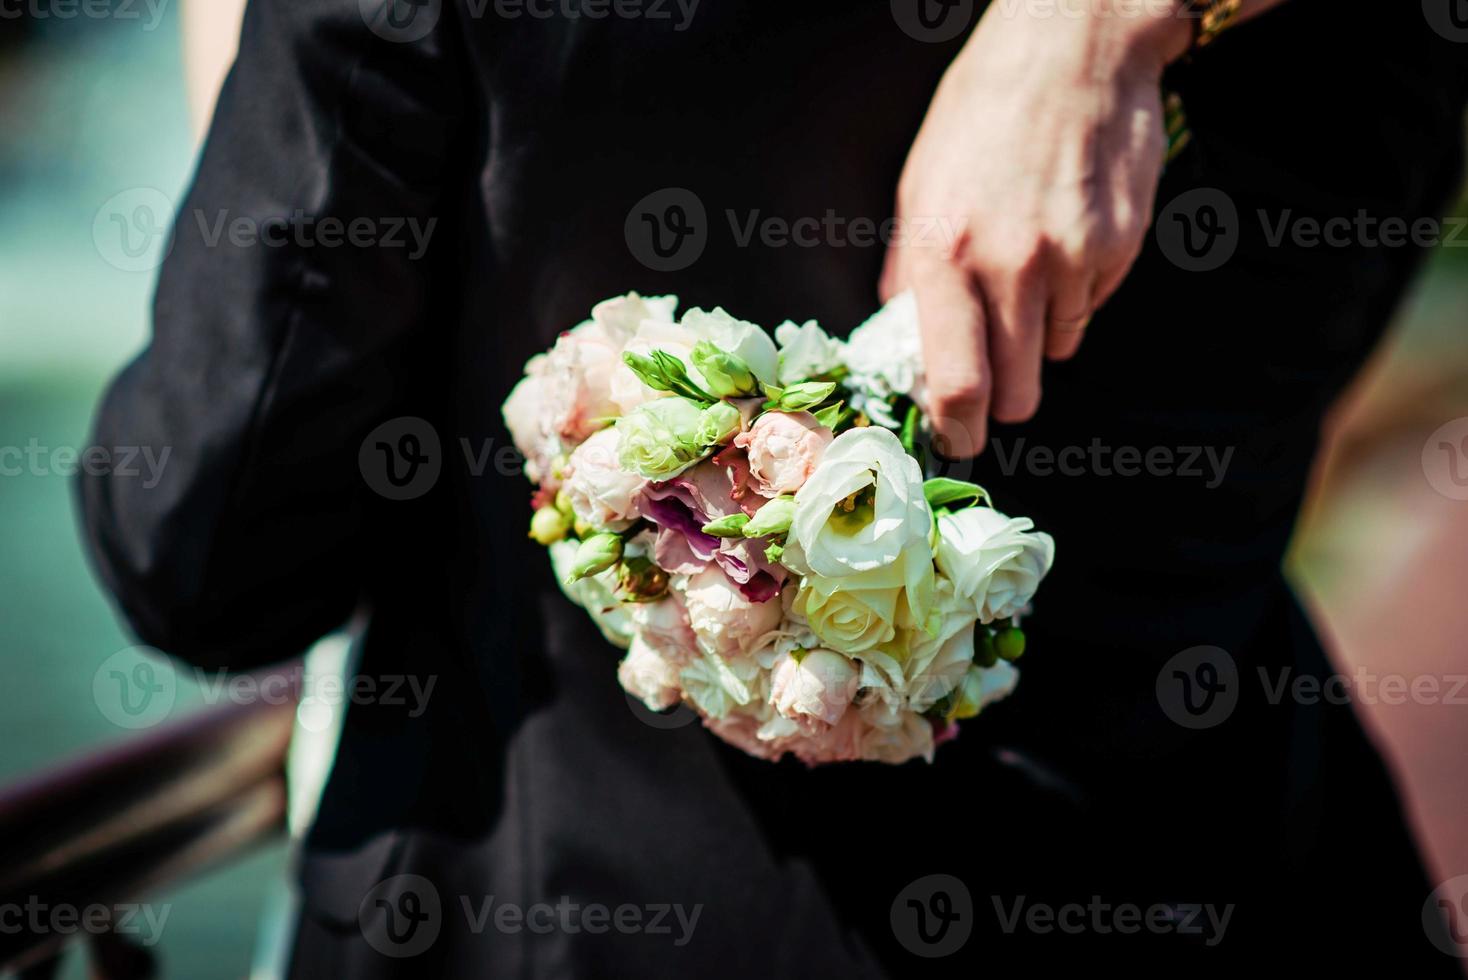 The bride holds a wedding bouquet in her hands, wedding day flowers. photo